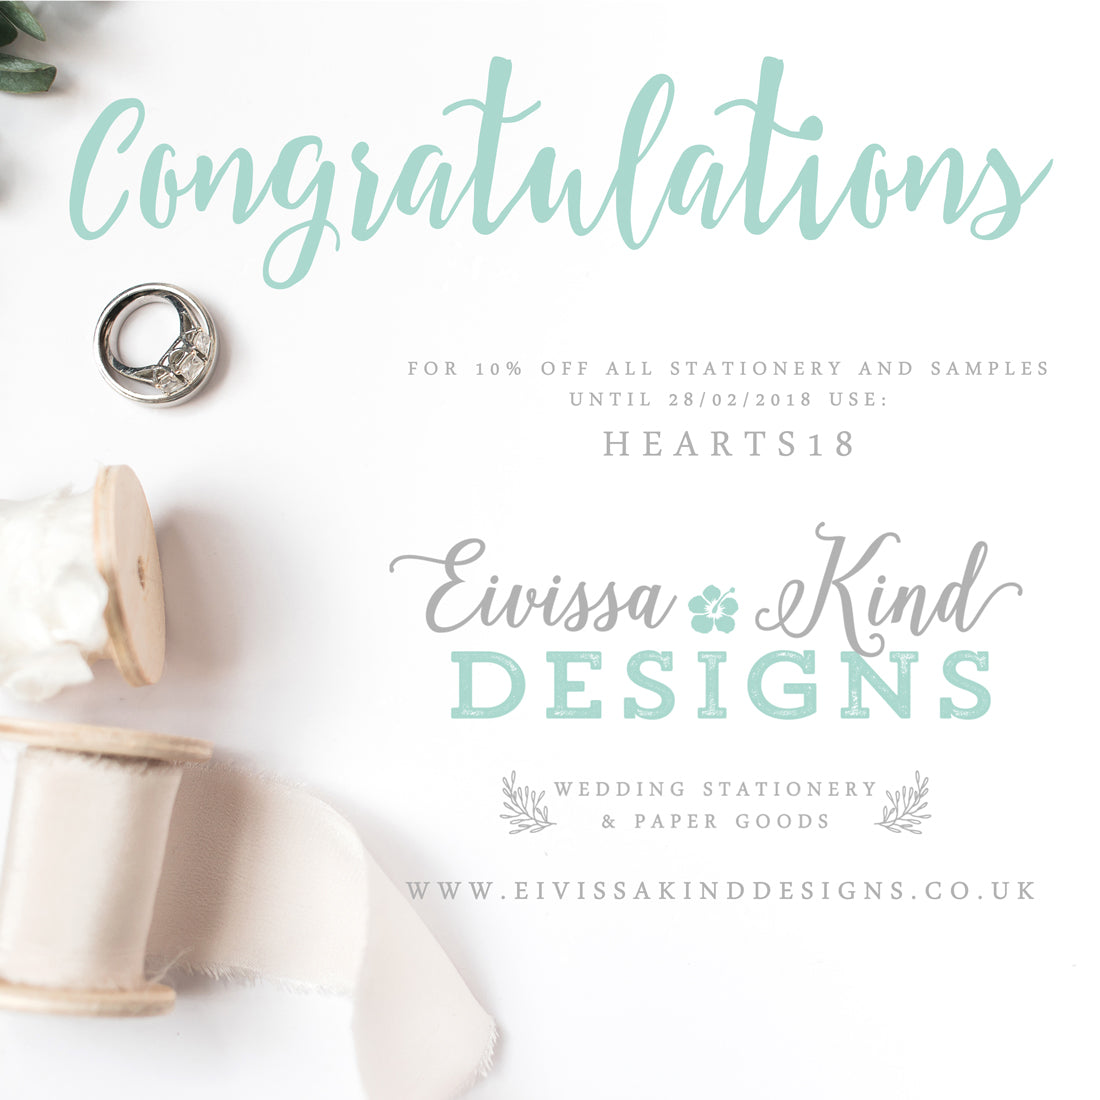 Here's 10% Off Wedding Invitation, Samples and more...